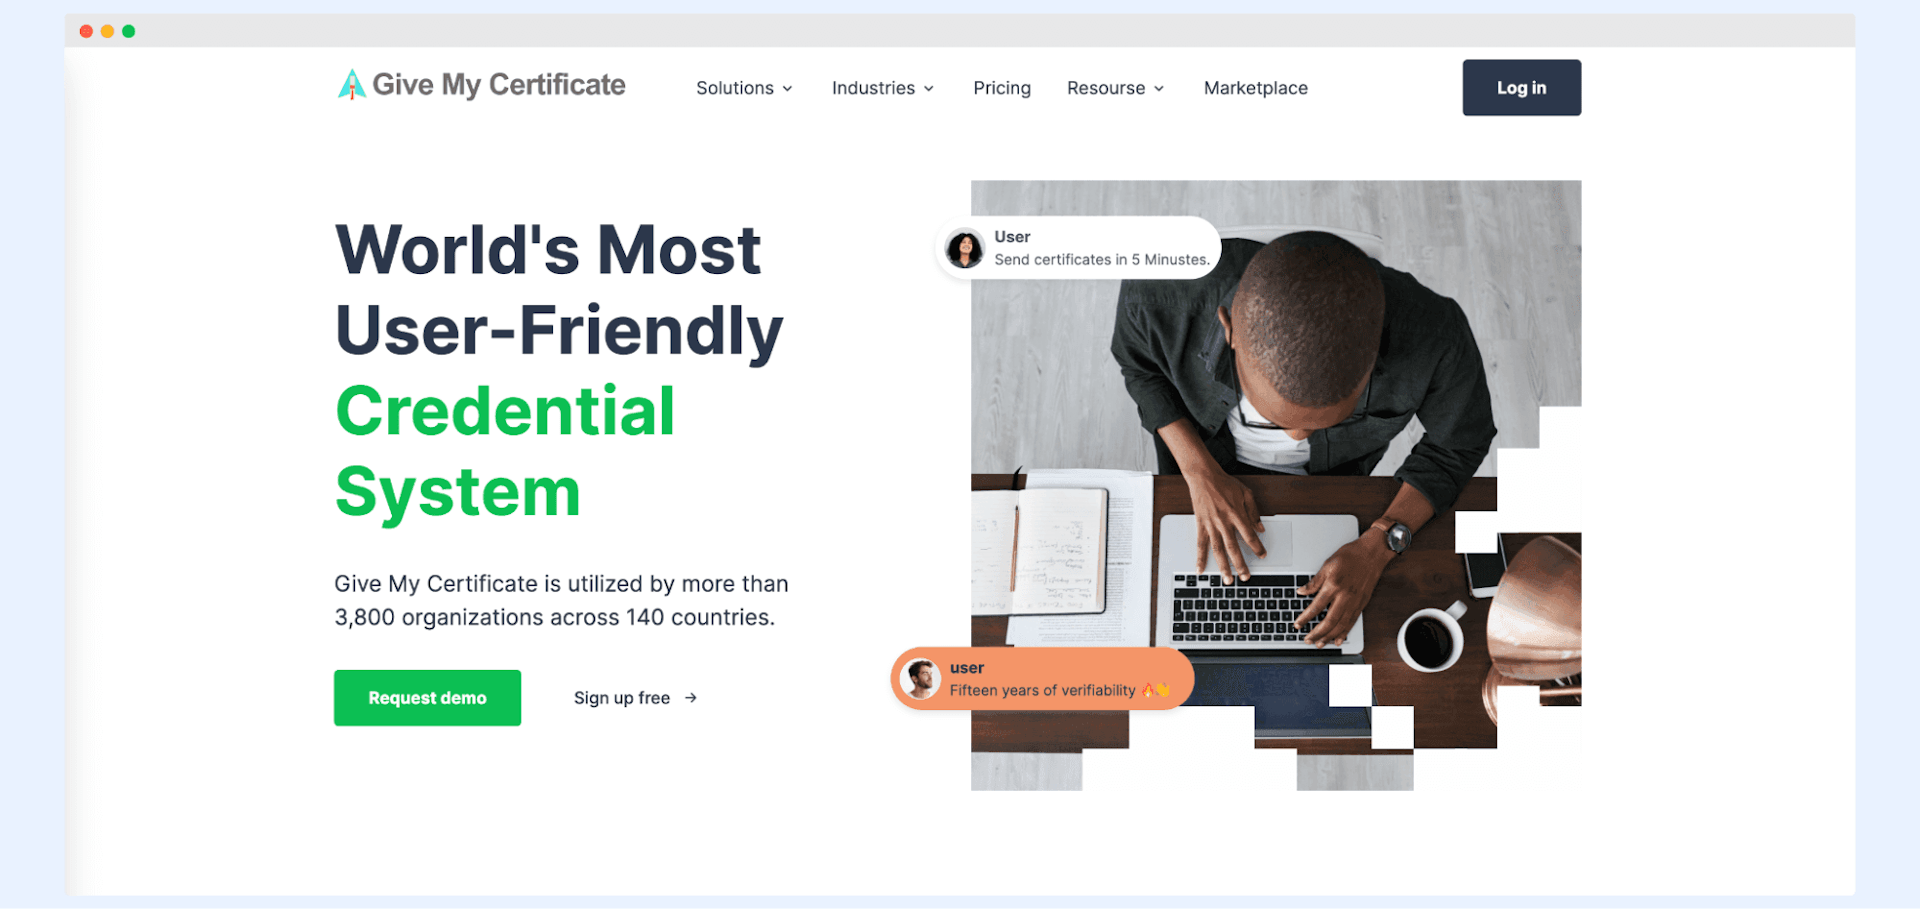 Give My Certificate as an alternative to CertifyMe.